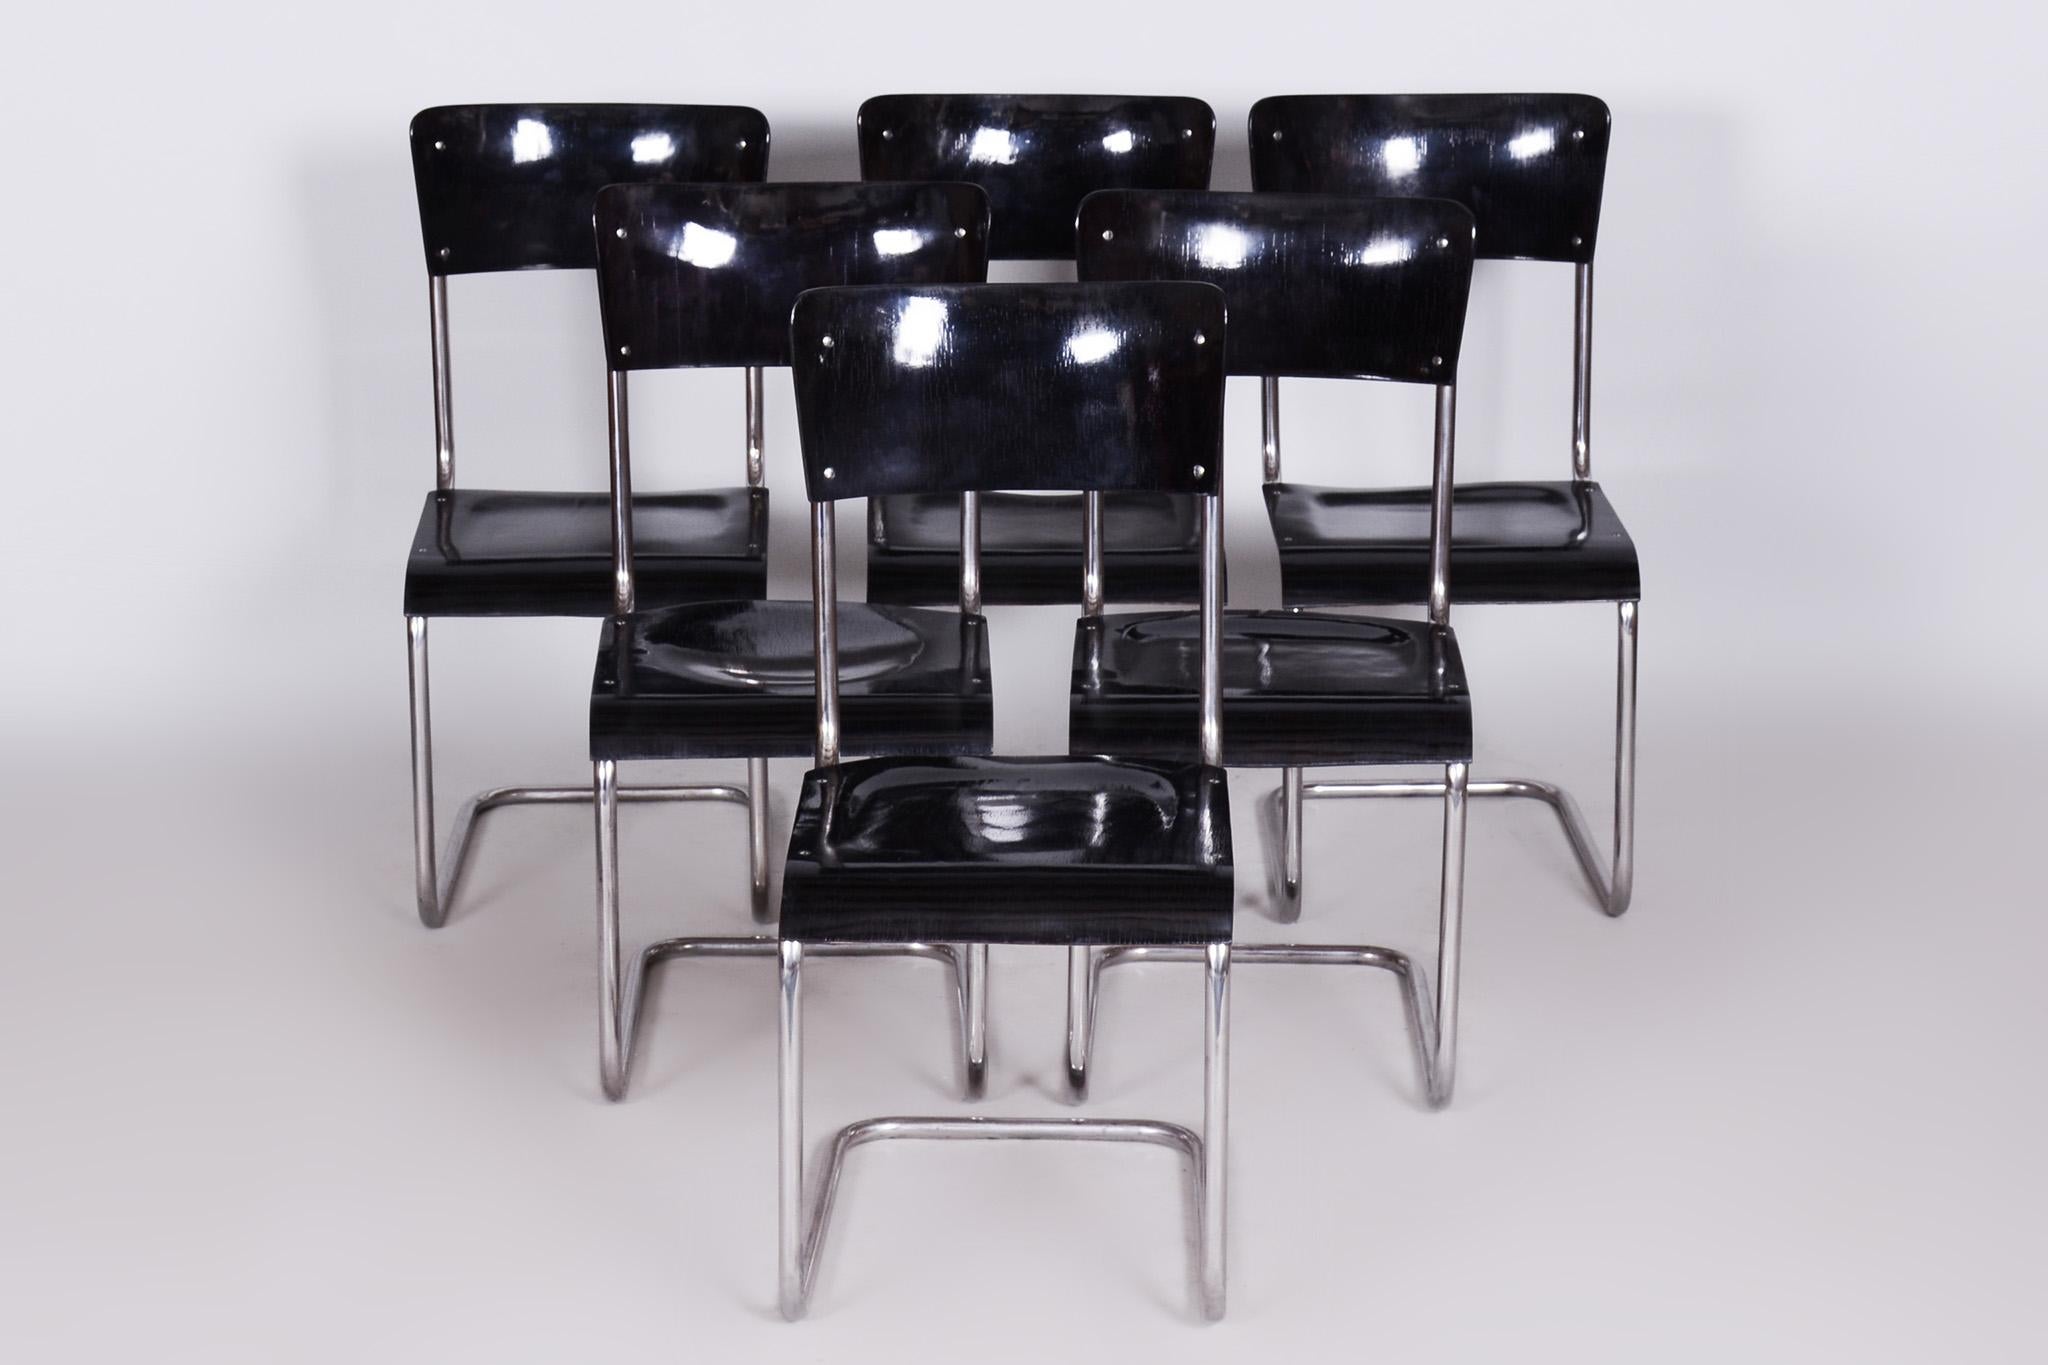 Set of 6 Vintage Bauhaus chairs. High gloss.

This original Bauhaus chairs manufactured by Vichr a spol is a perfect representation of the simplistic elegance of the Bauhaus Era.

Period: 1930 - 1939
Material: Lacquered wood, Chrome-plated